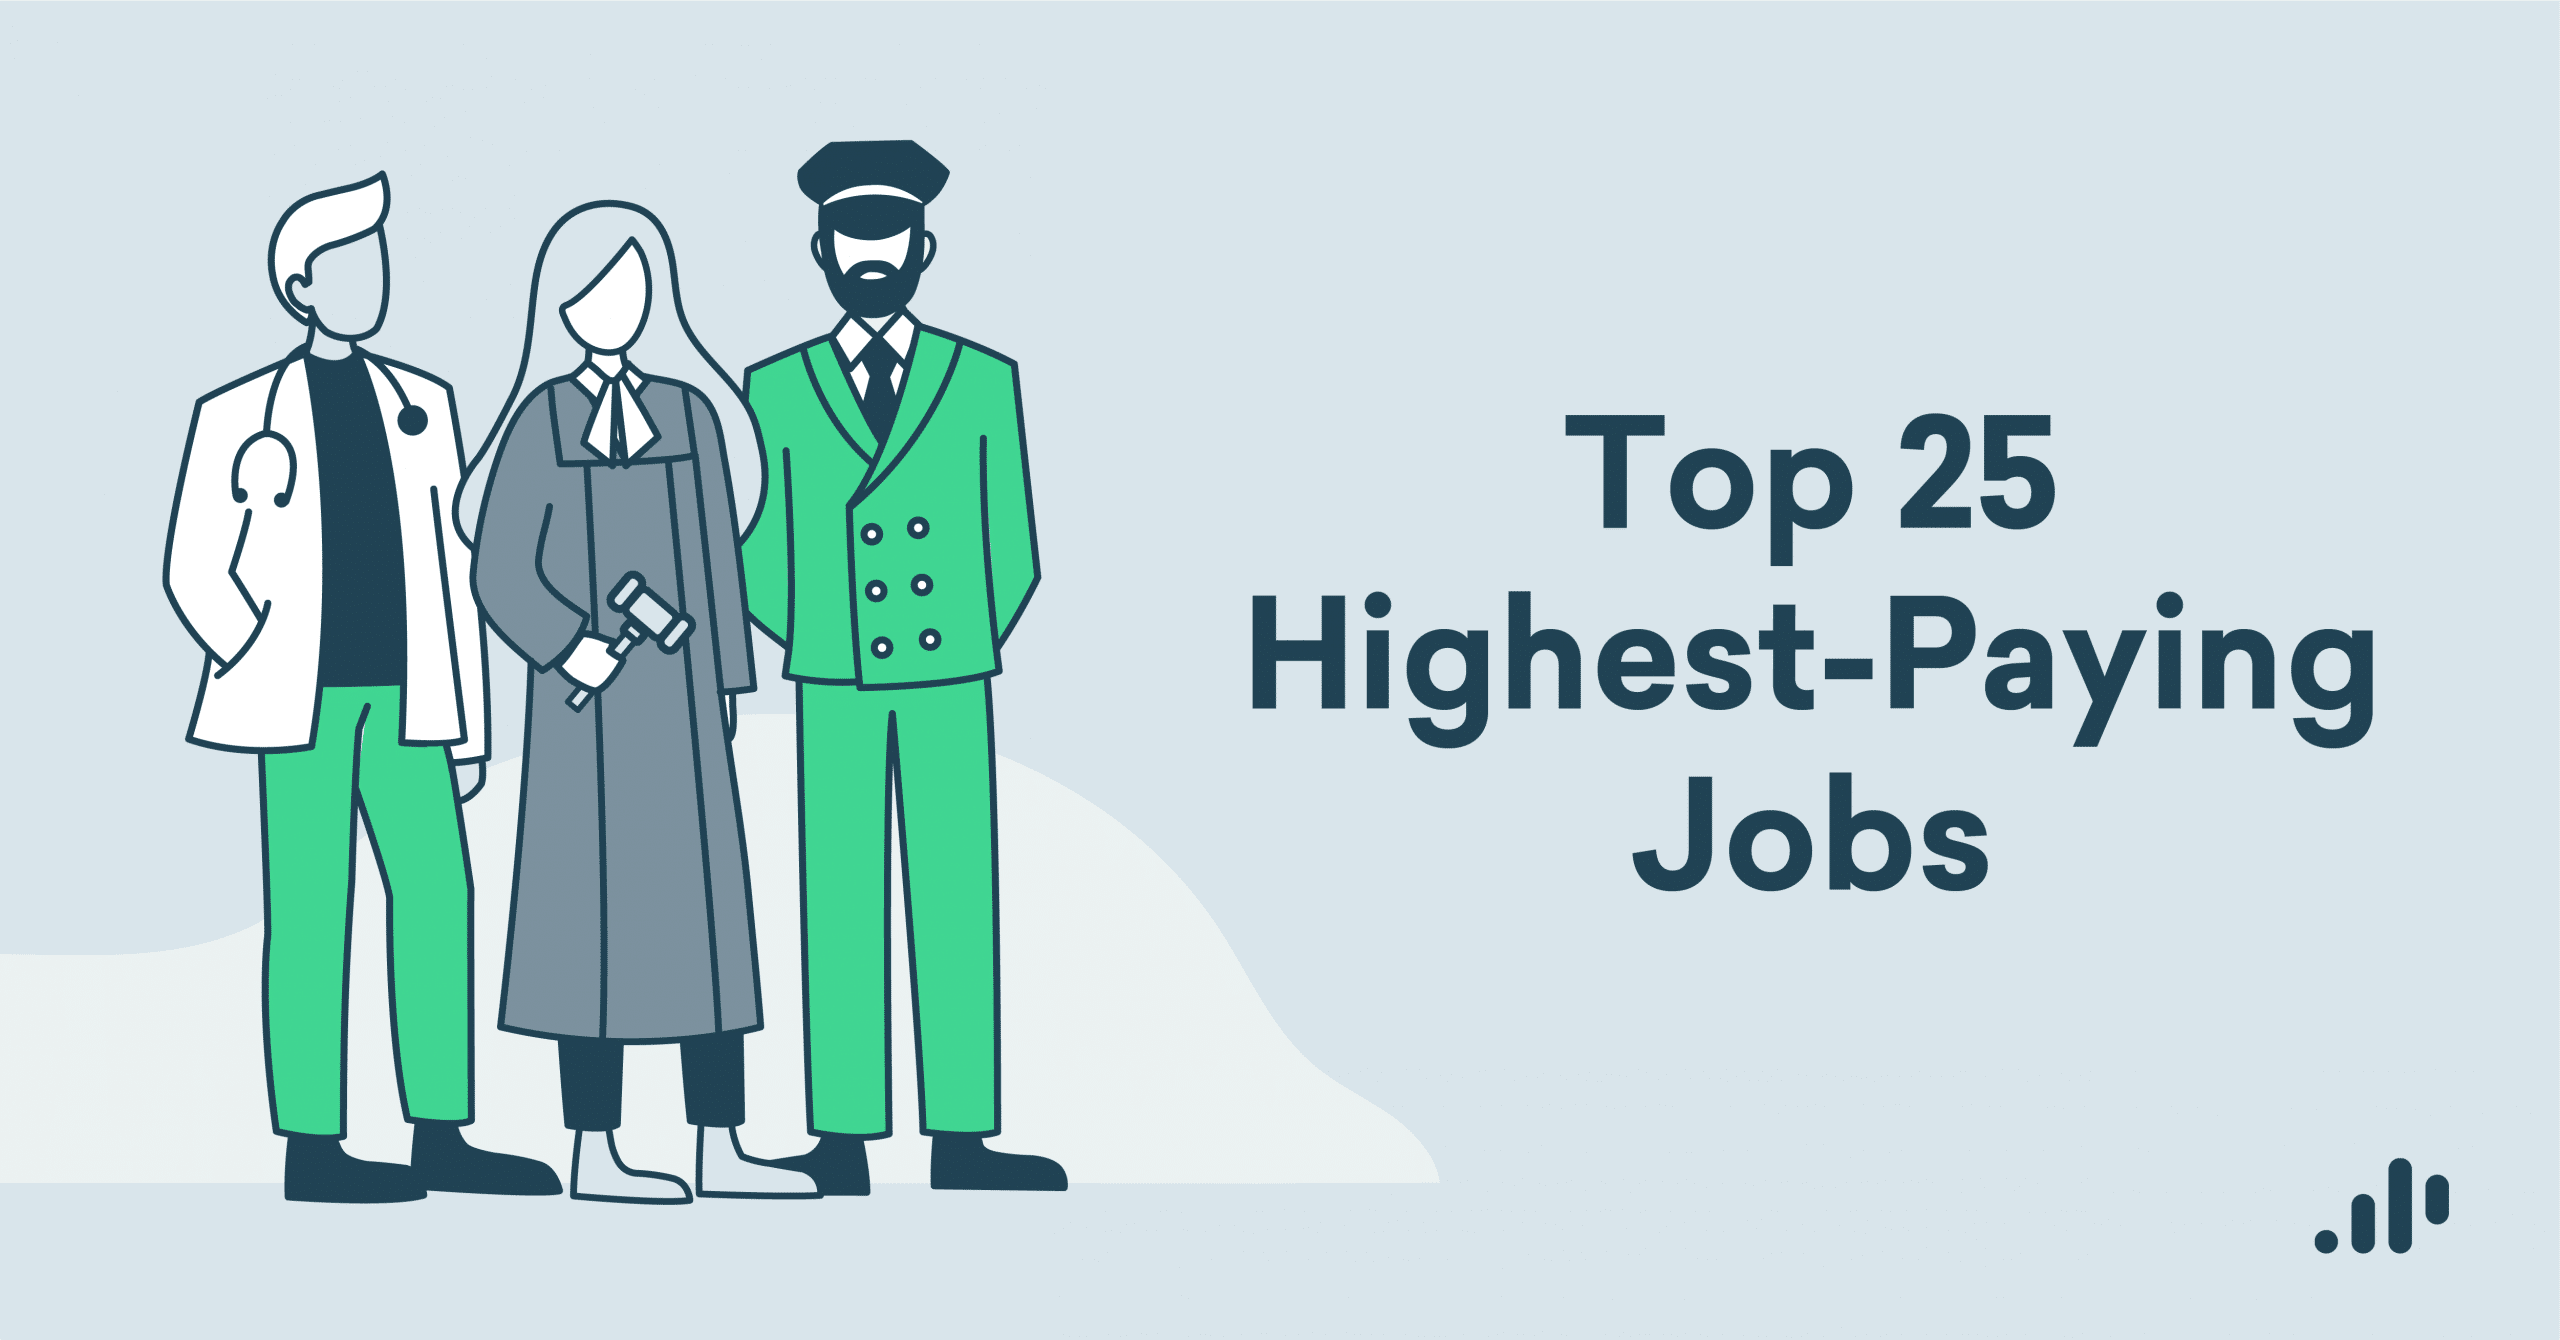 The Top 25 Highest-Paying Jobs to Start 2020